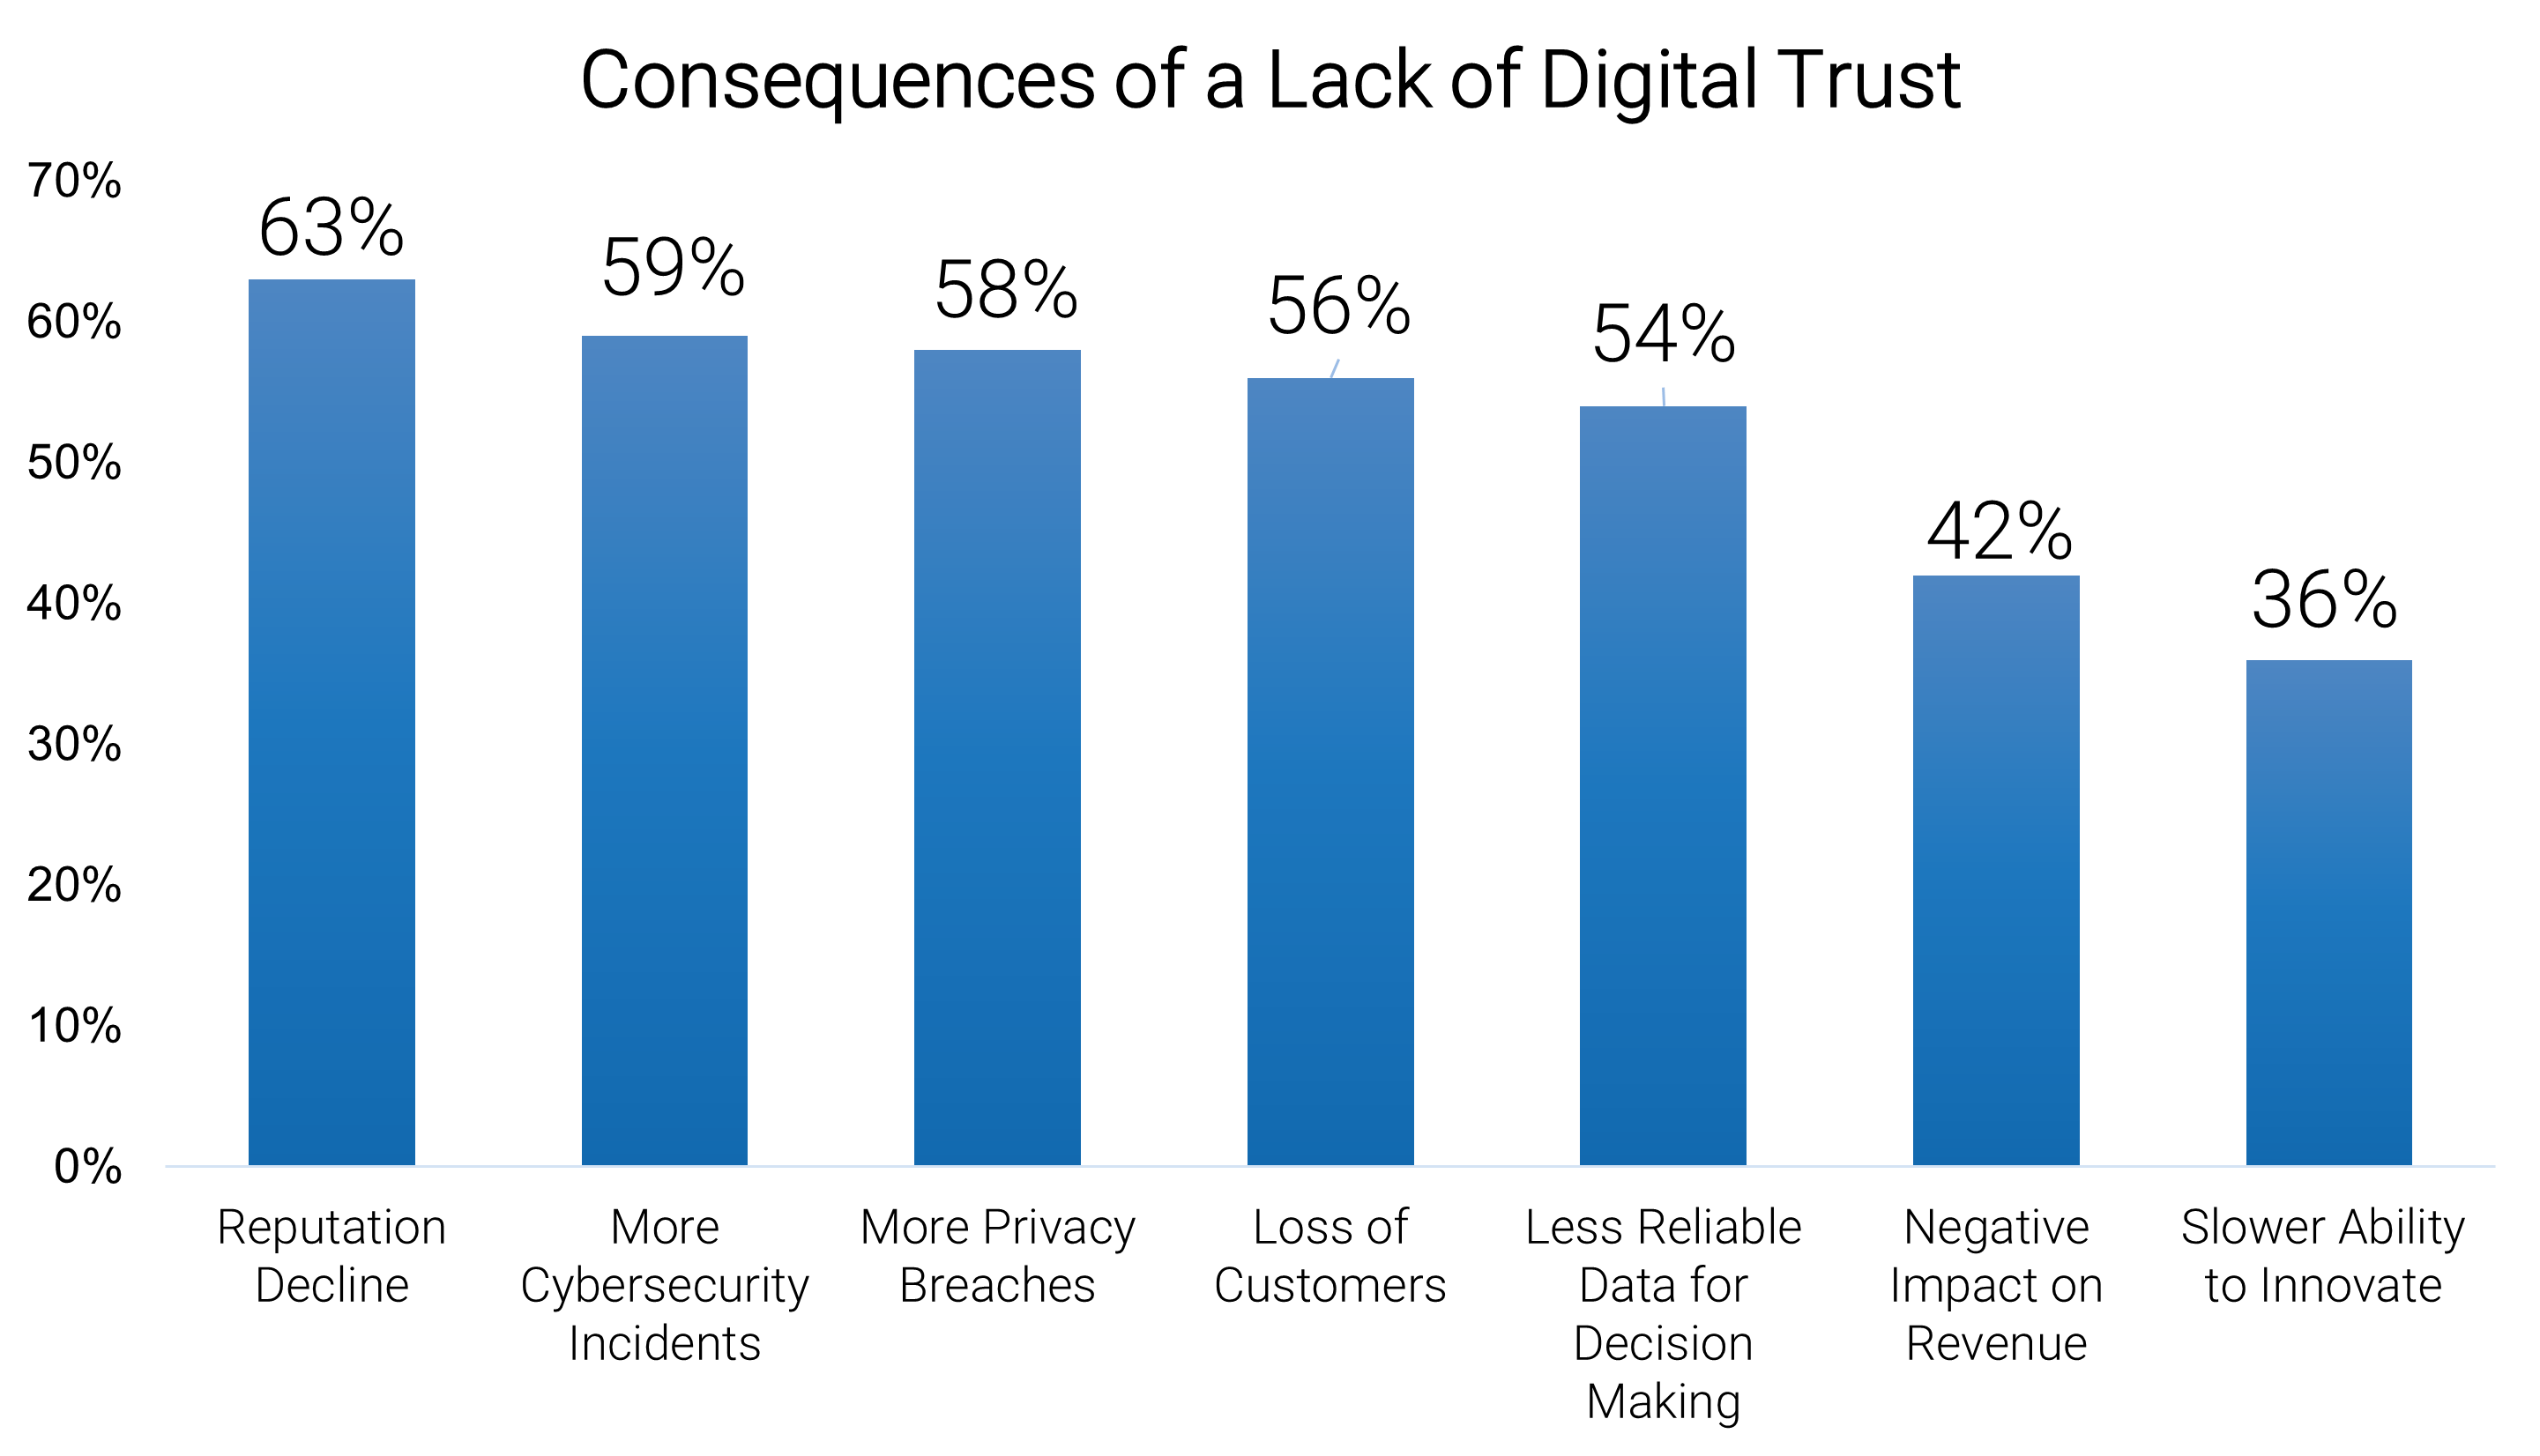 The image contains a graph that demonstrates the consequences of a lack of digital trust.